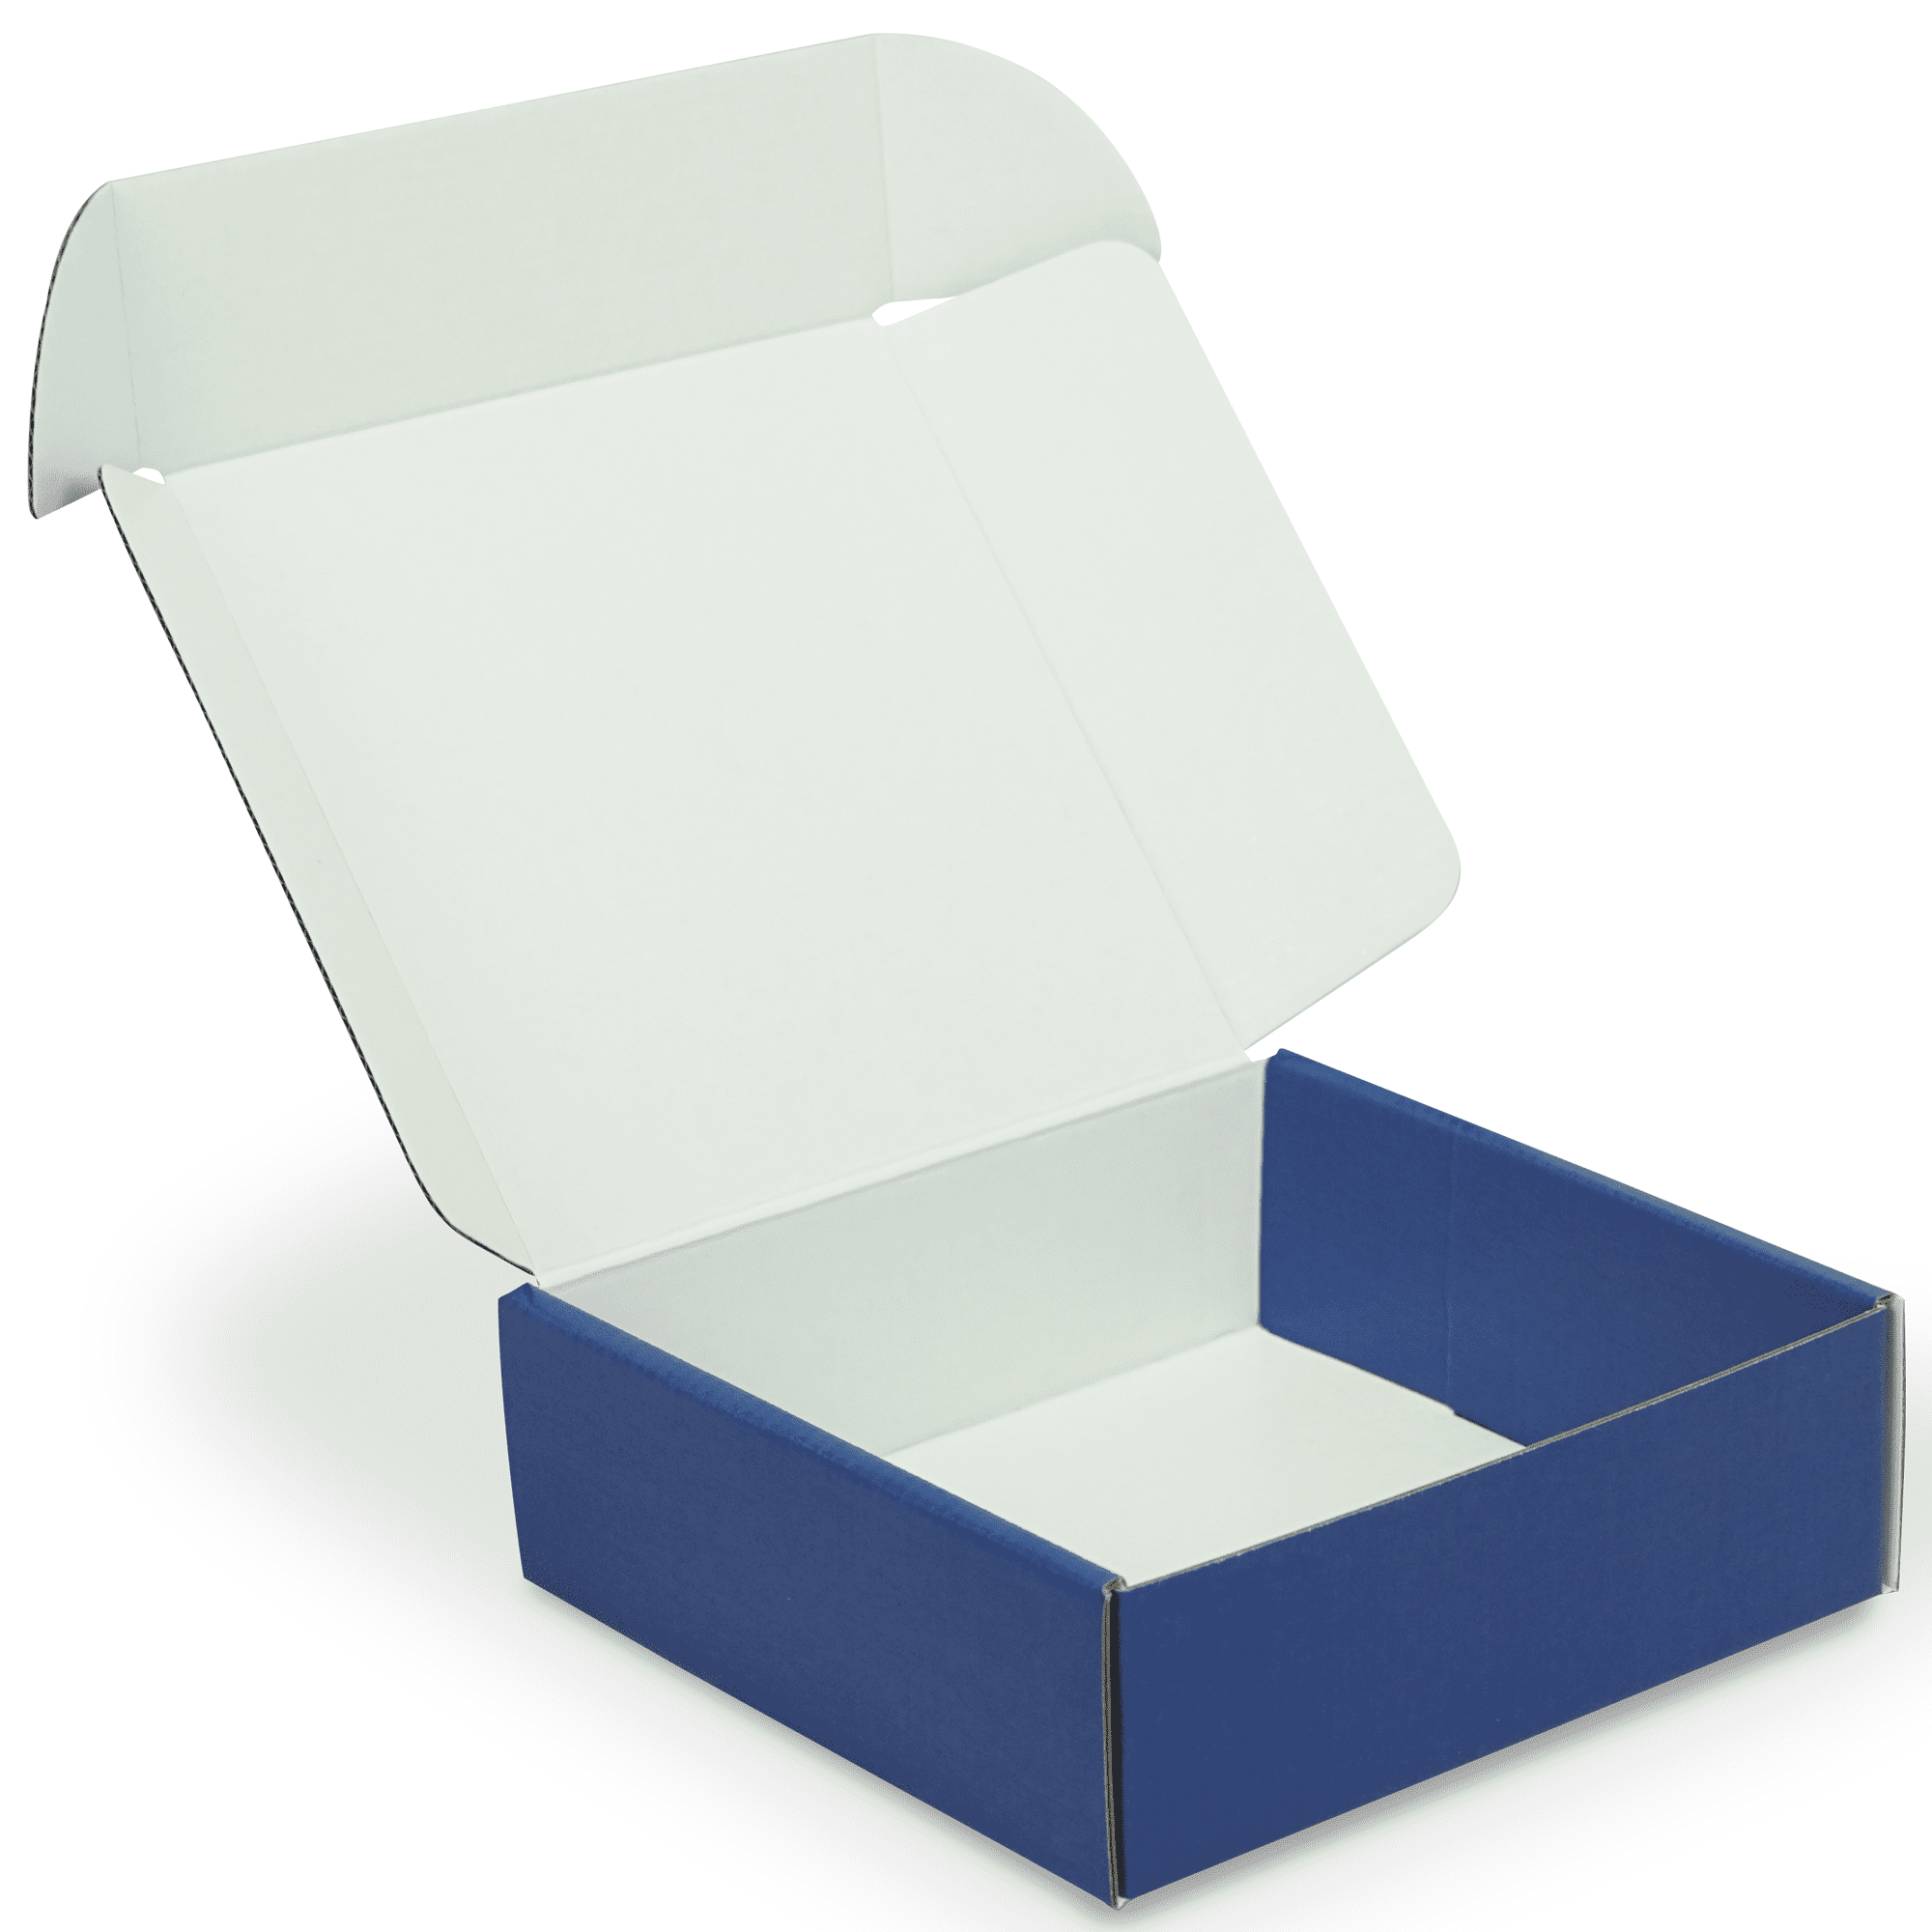 6 x 6 x 2 Blue Shipping Box Navy Blue Shipping Boxes Blue Gift Boxes Bundle of 20 Mailer Boxes by Fantastapack 